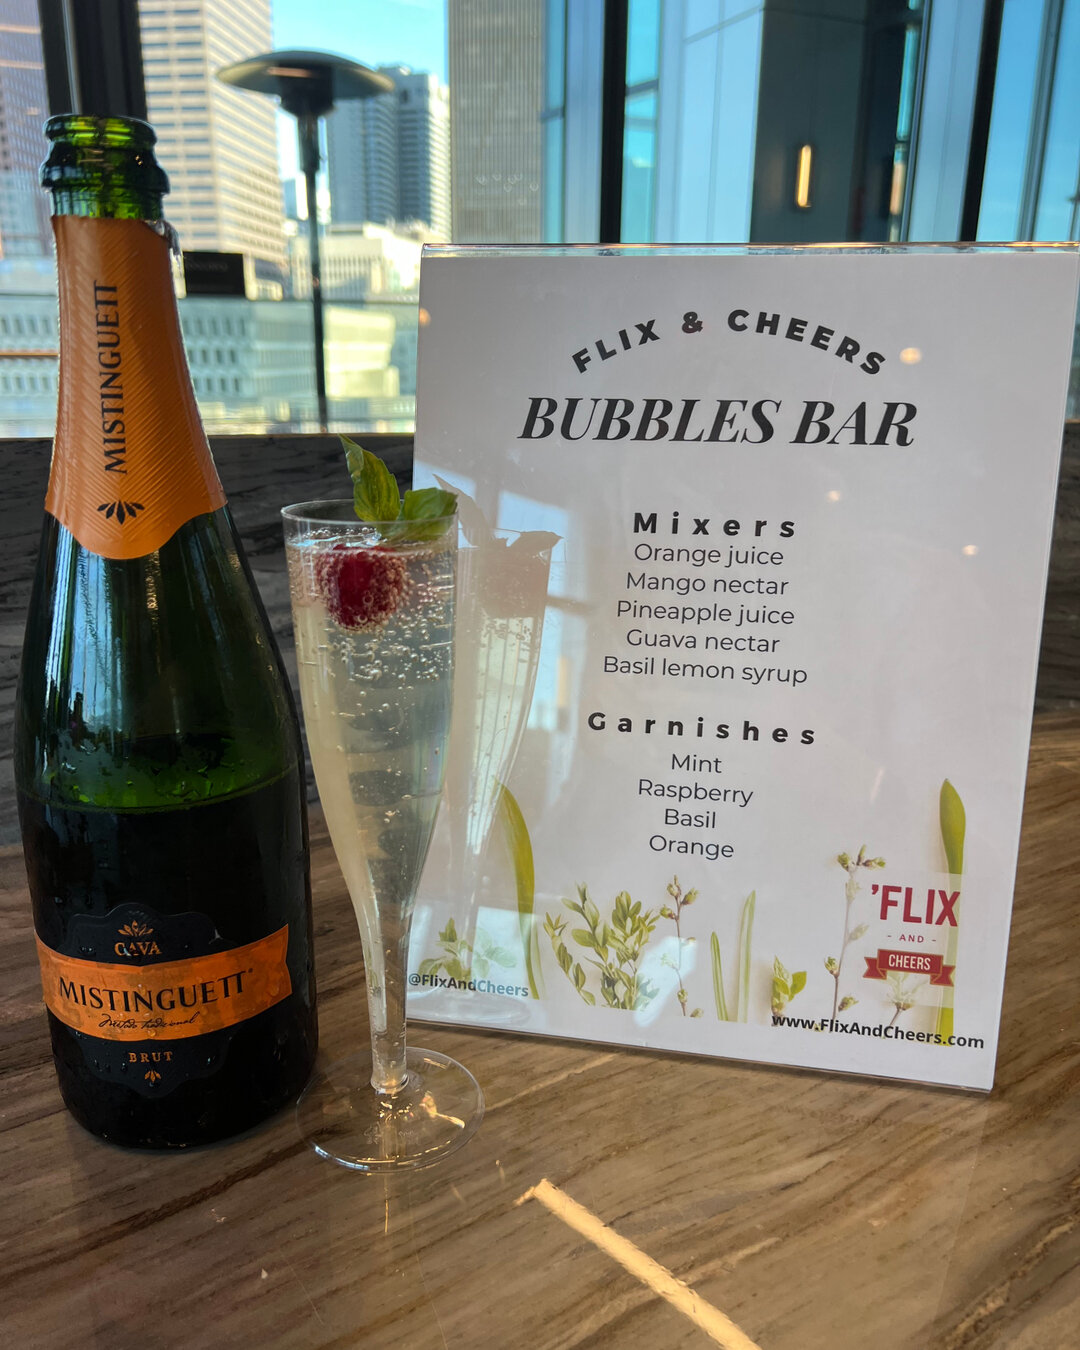 Temperatures are rising. Cool off with our popular Bubble Mixers! ​​​​​​​​
​​​​​​​​
Want to learn more about our cocktail bar packages? For a drink experience you will never forget, message us for details. Dates available through the summer. ​​​​​​​​